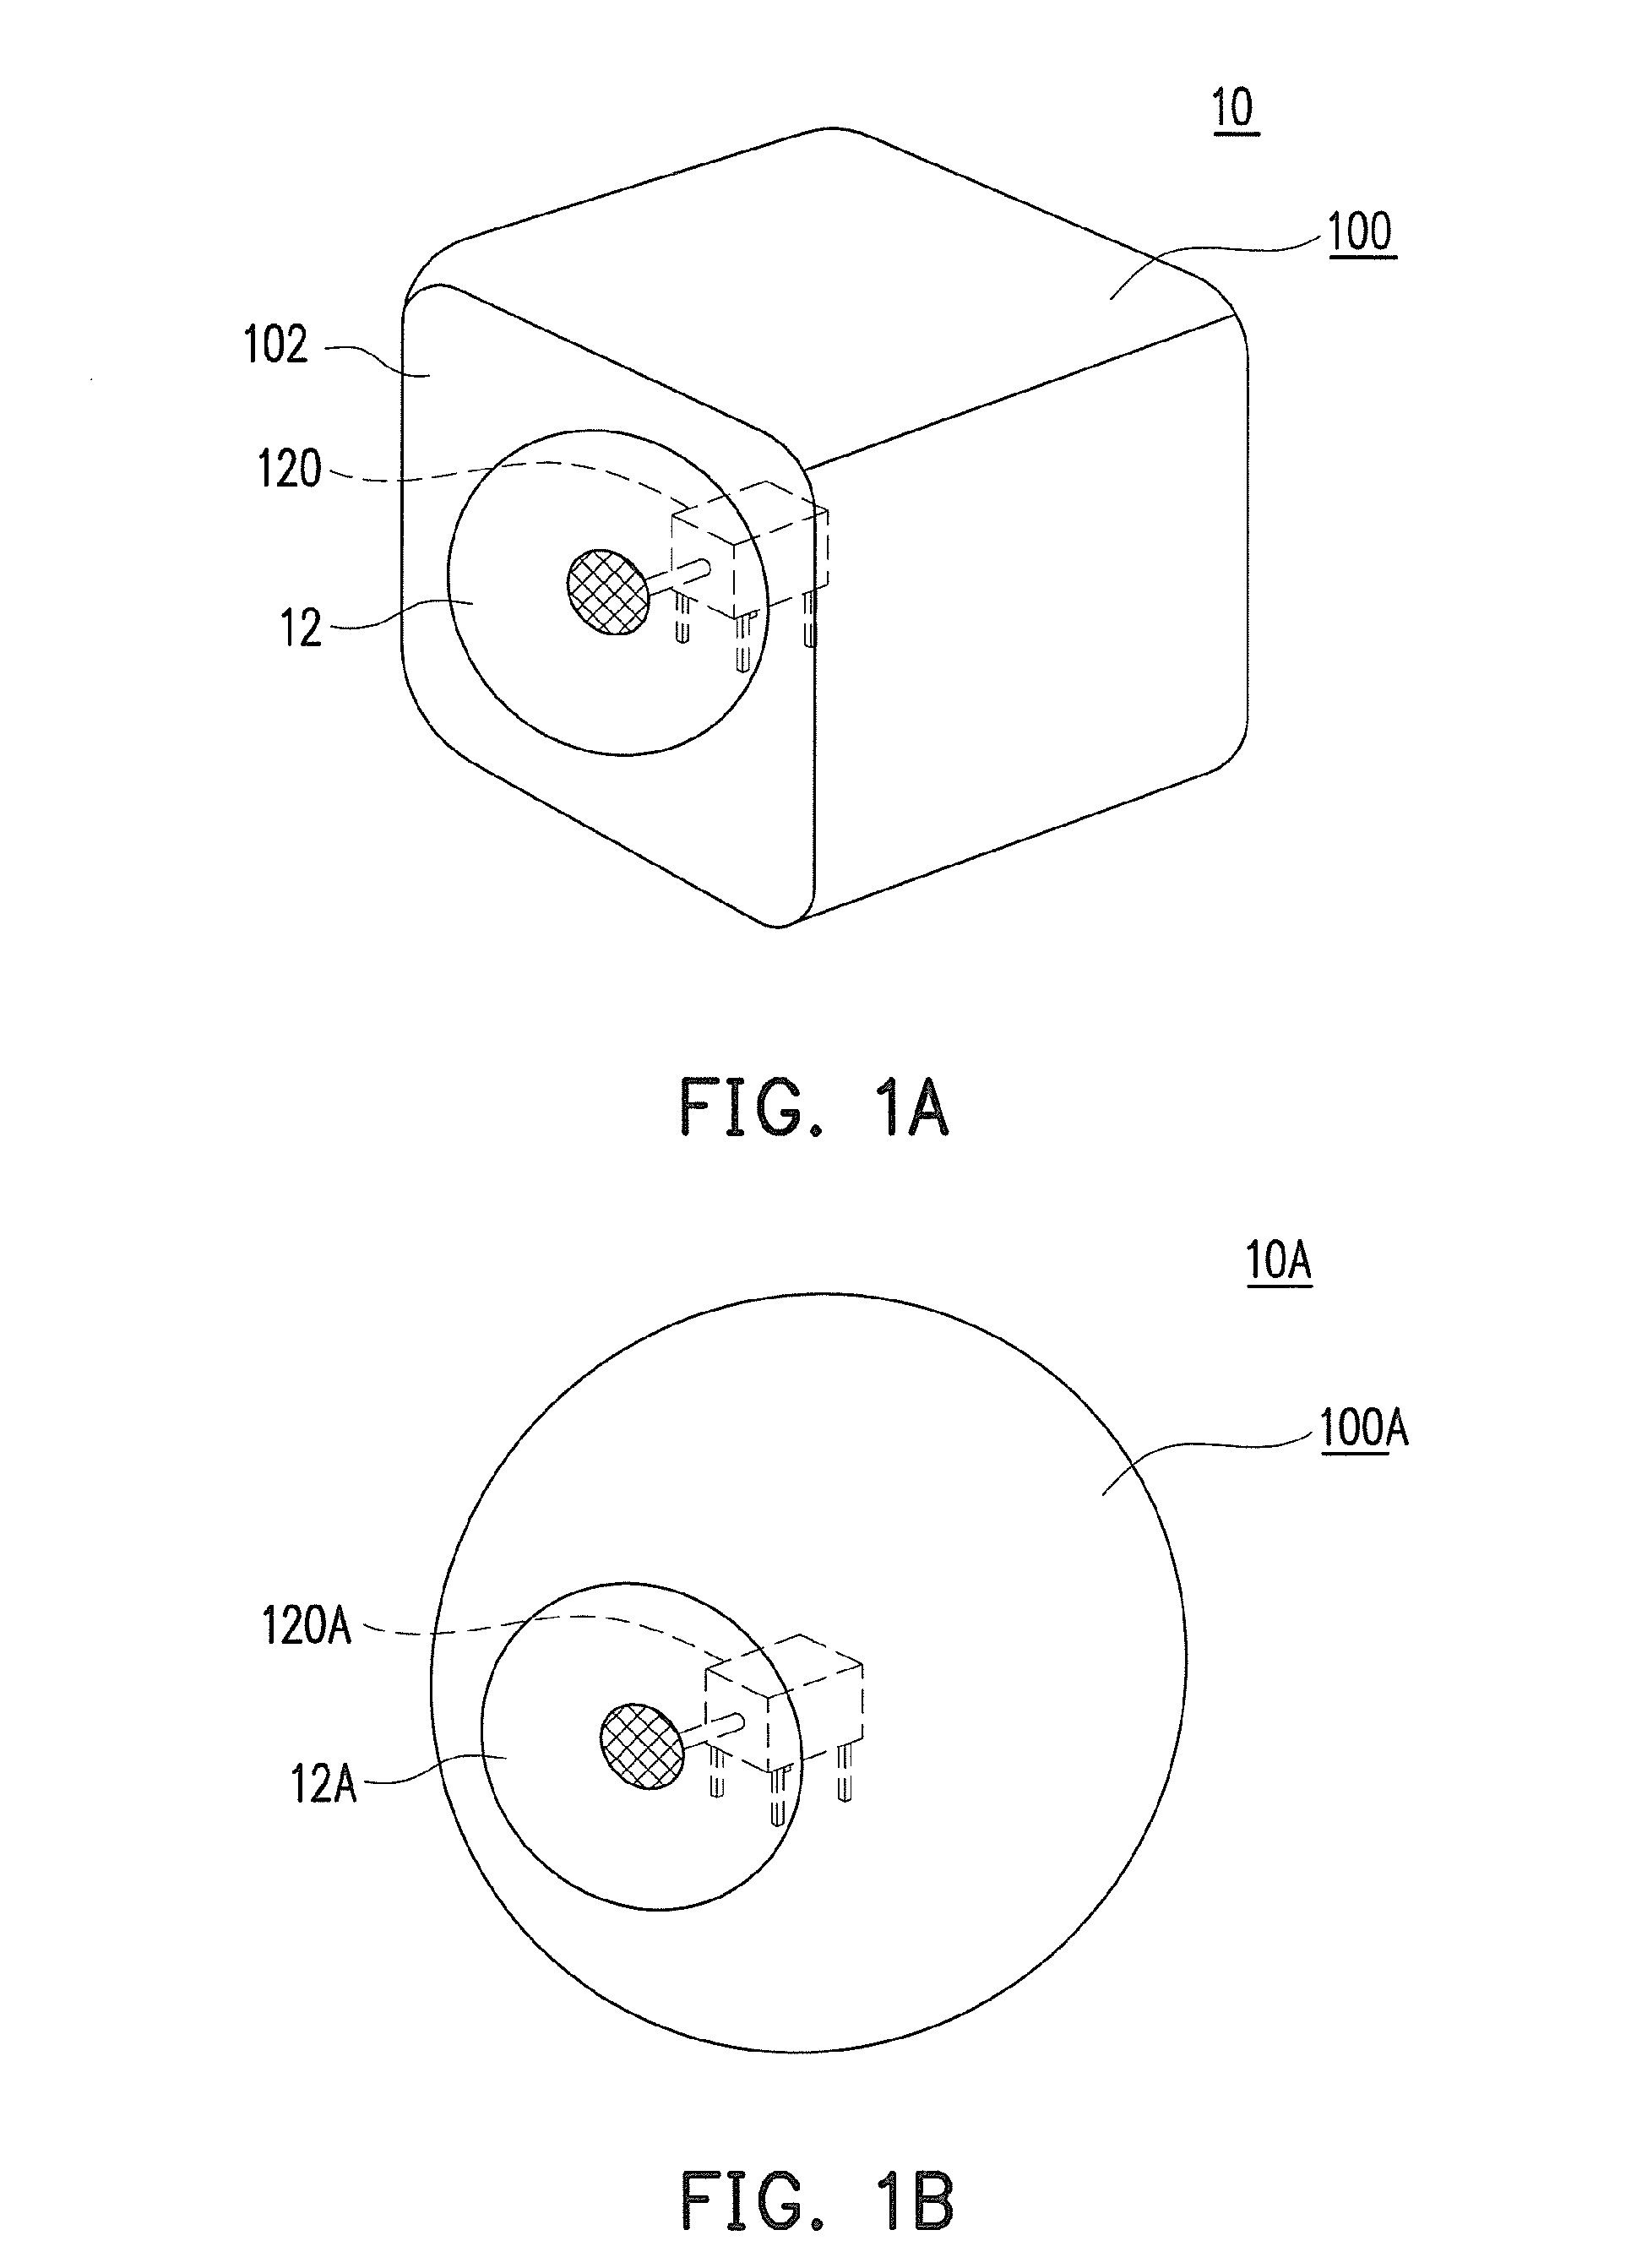 Electronic pet and pet interaction system thereof